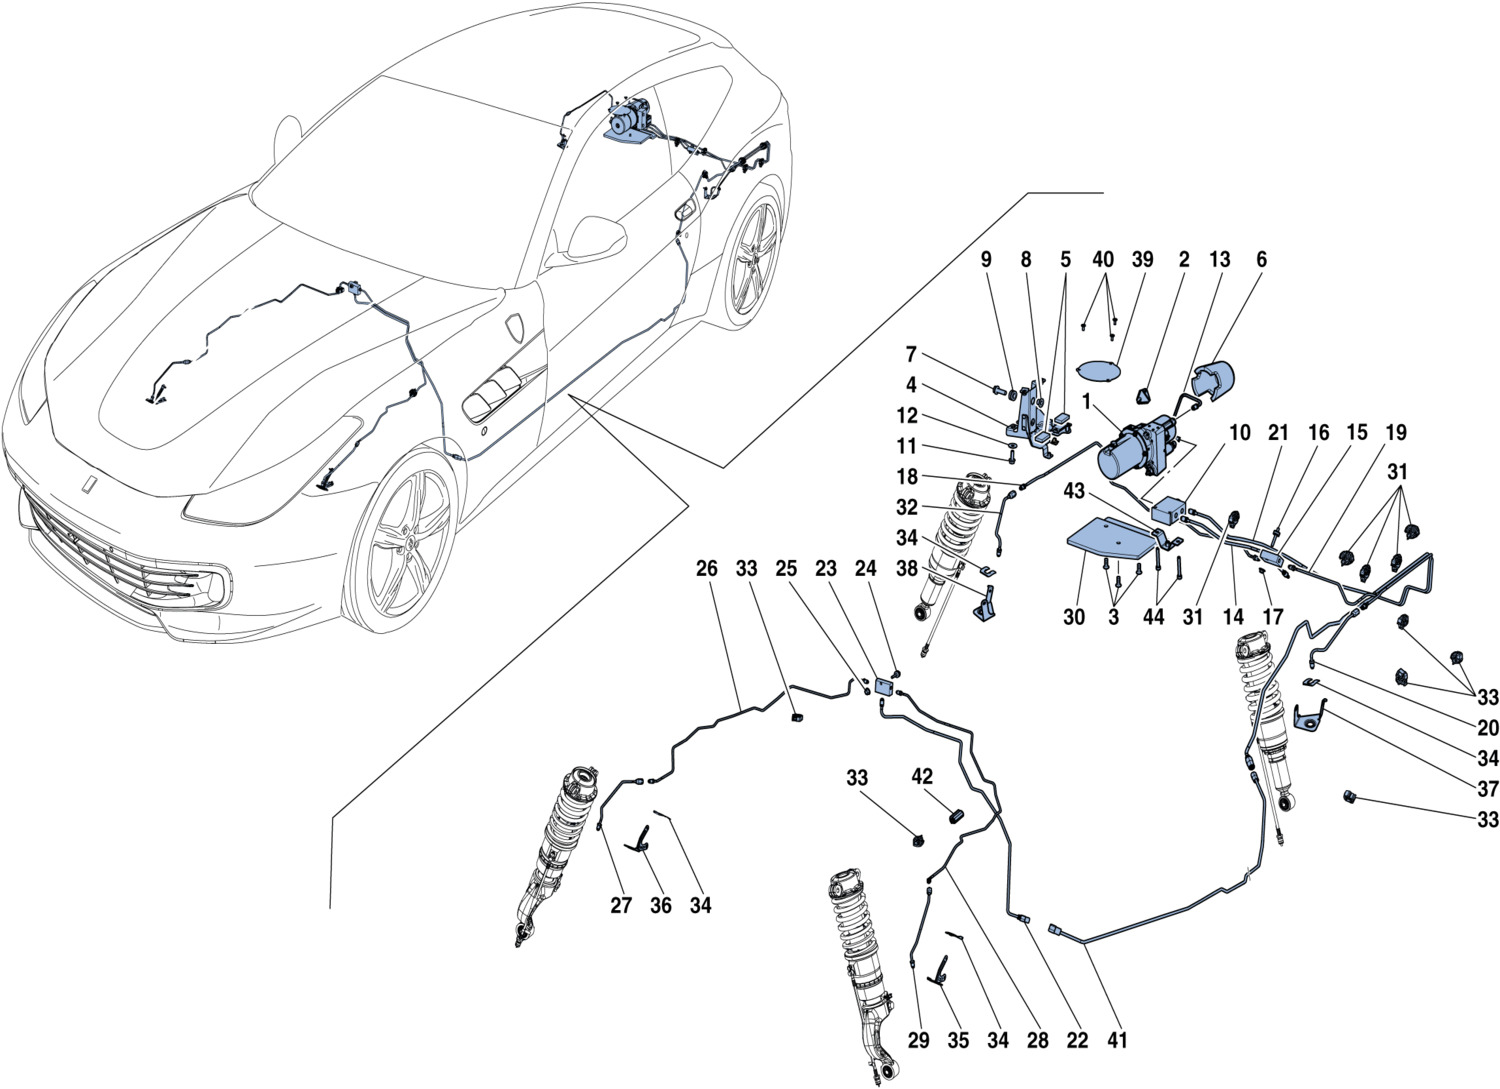 Schematic: Tyre Pressure Monitoring System